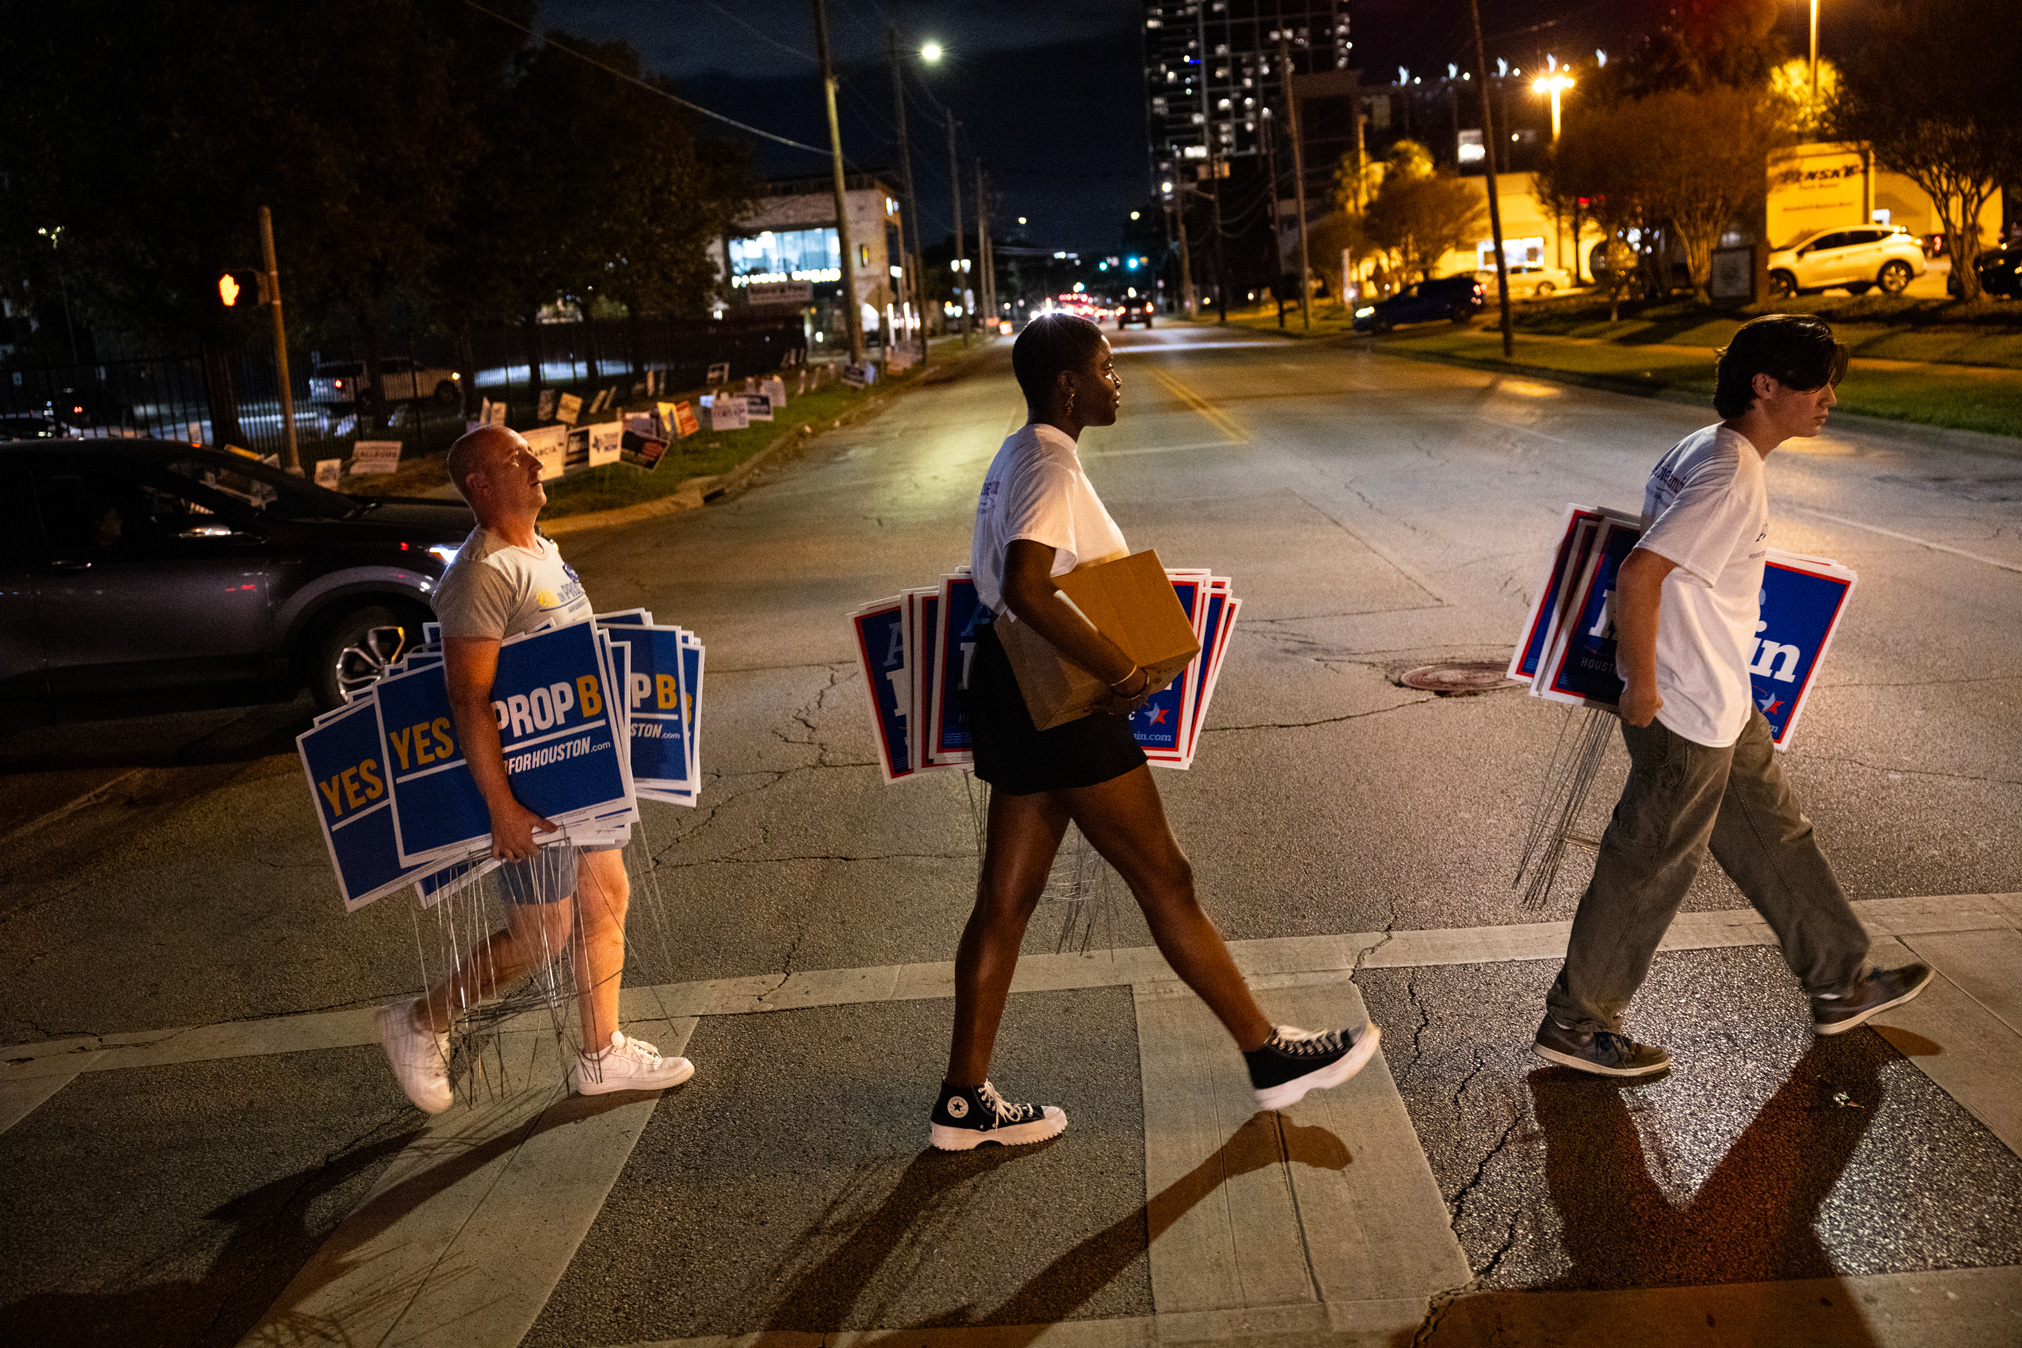 From left, Jarrett Lauderdale, Aliyah Efotte, and Julian Nguyen cross Gray Street carrying campaign signs for Yes on Prop B and for Abbie Kamin’s City Council re-election after voting closed at the Metropolitan Multi-Service Center on Election Day,